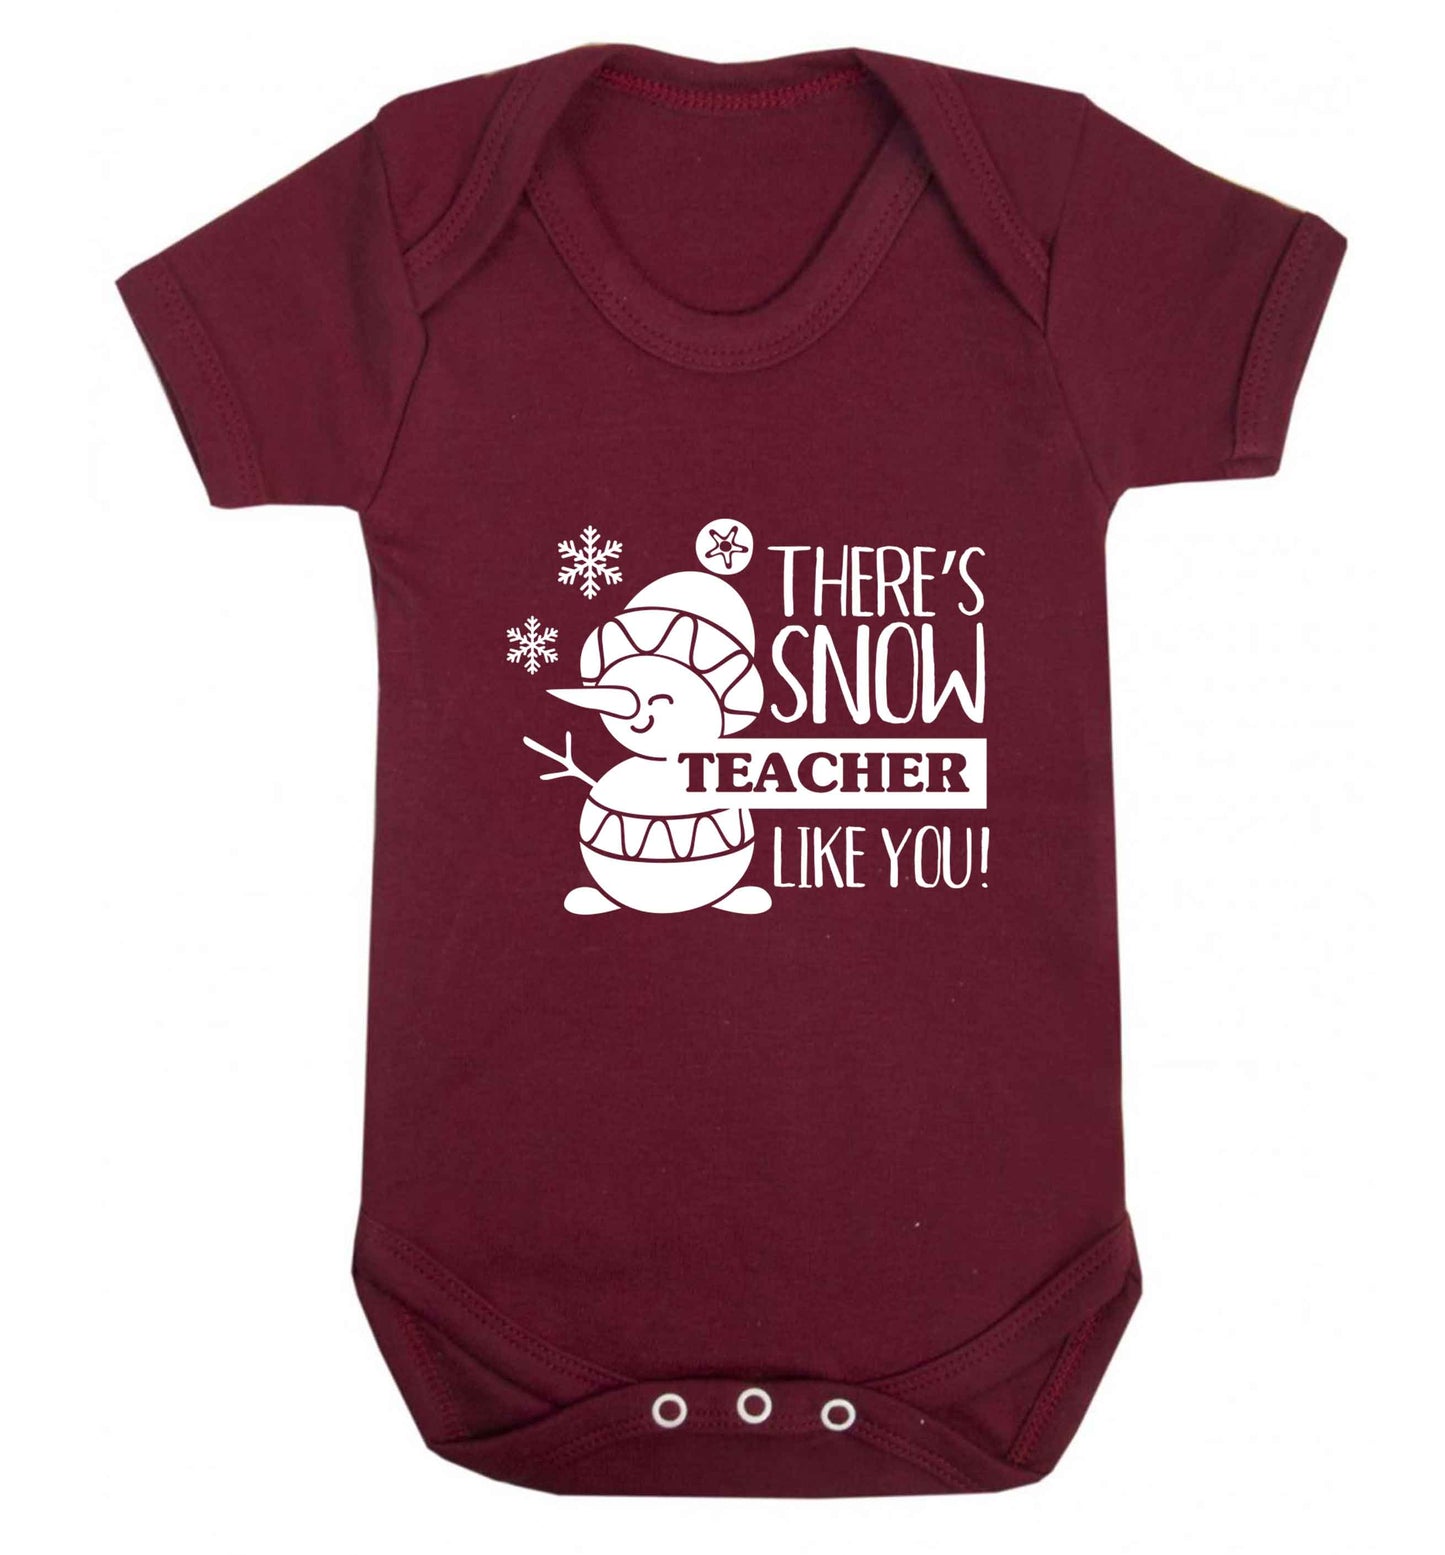 There's snow teacher like you baby vest maroon 18-24 months